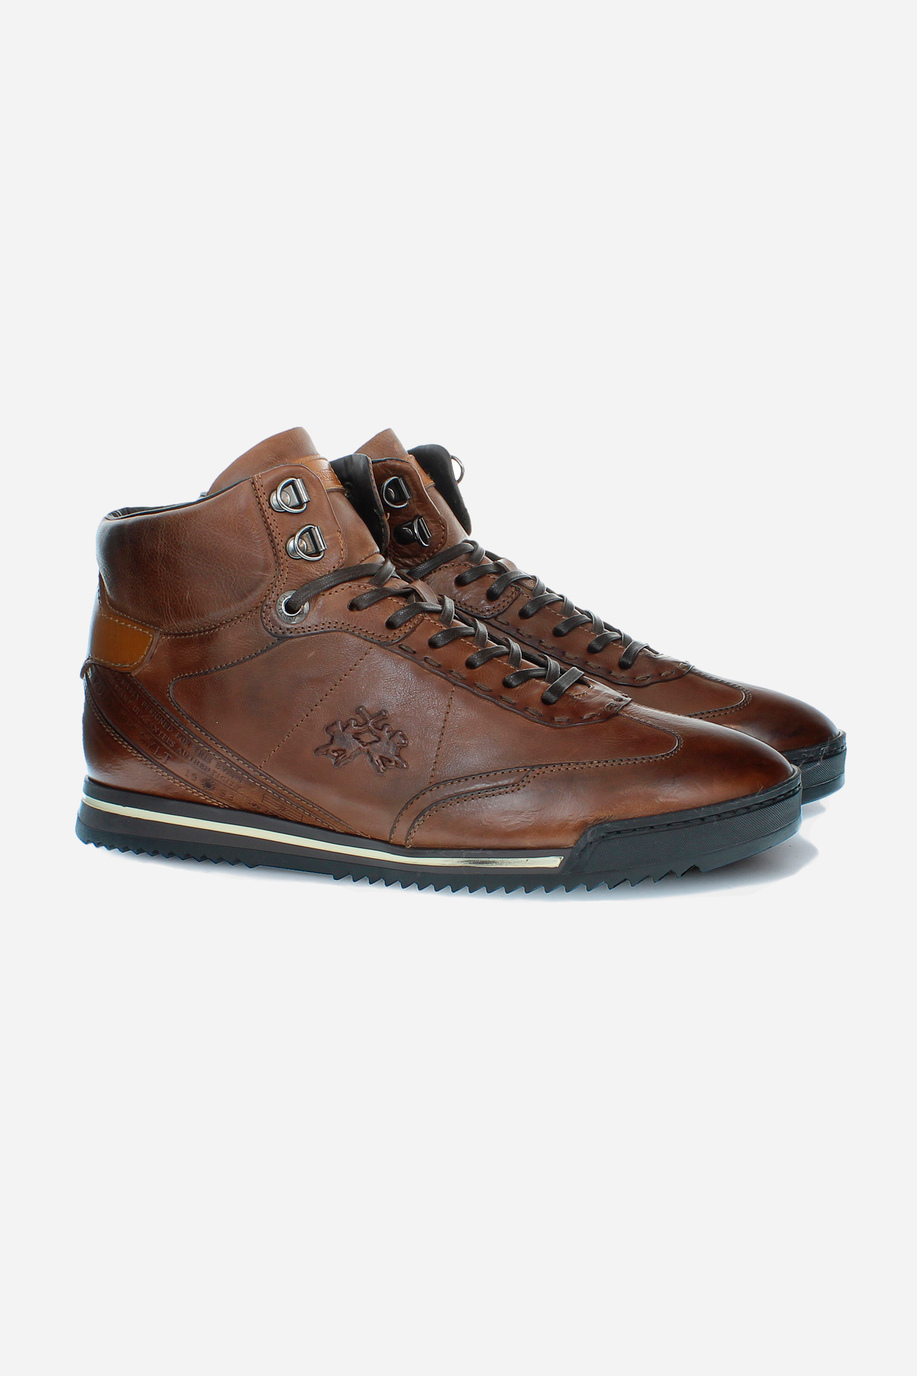 High-top men's trainer in calfskin with contrasting leather inserts - Accessories | La Martina - Official Online Shop